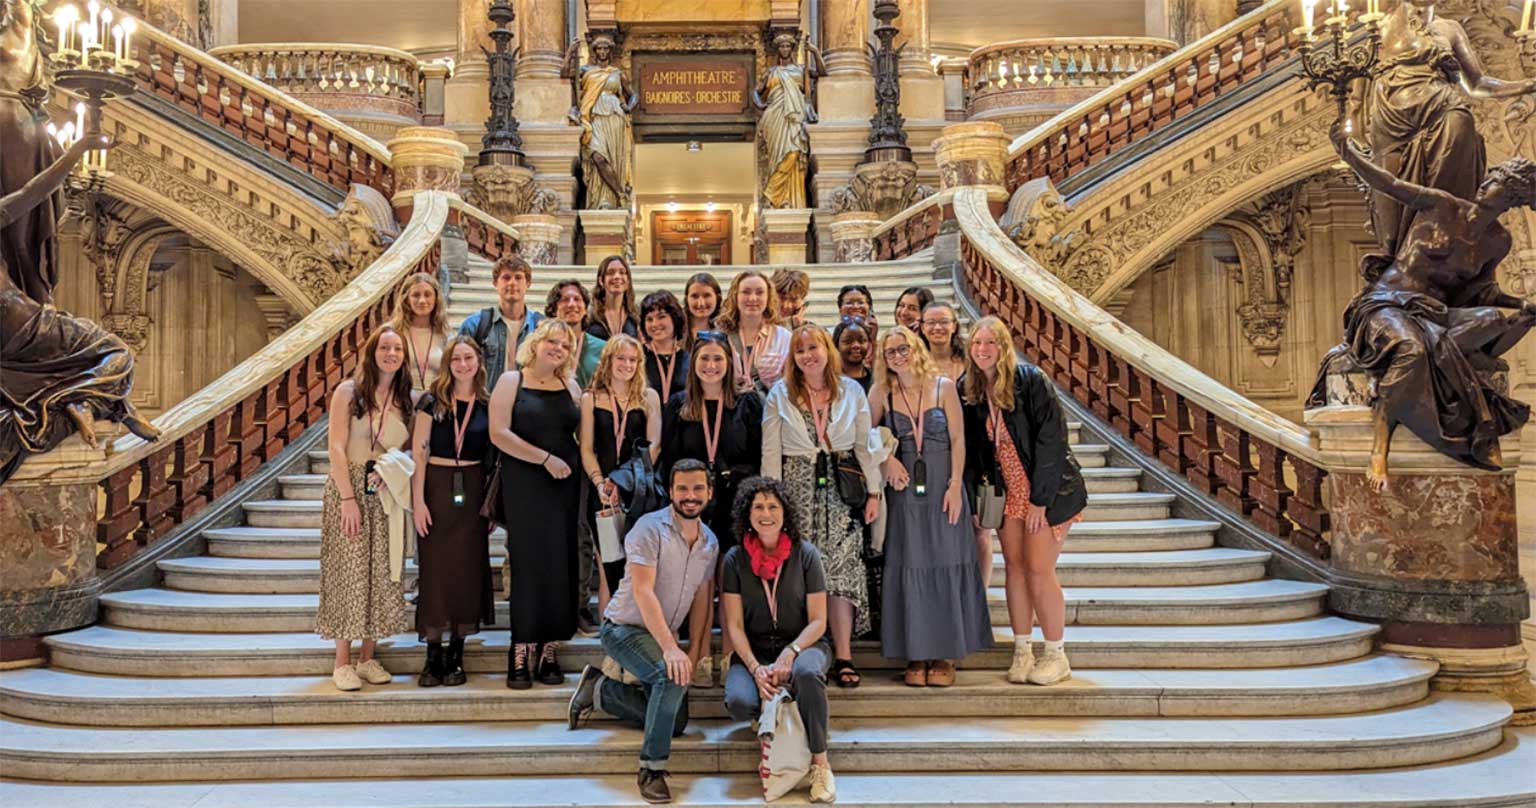 A group of students pose together on the steps of an ornate, winding staircase.